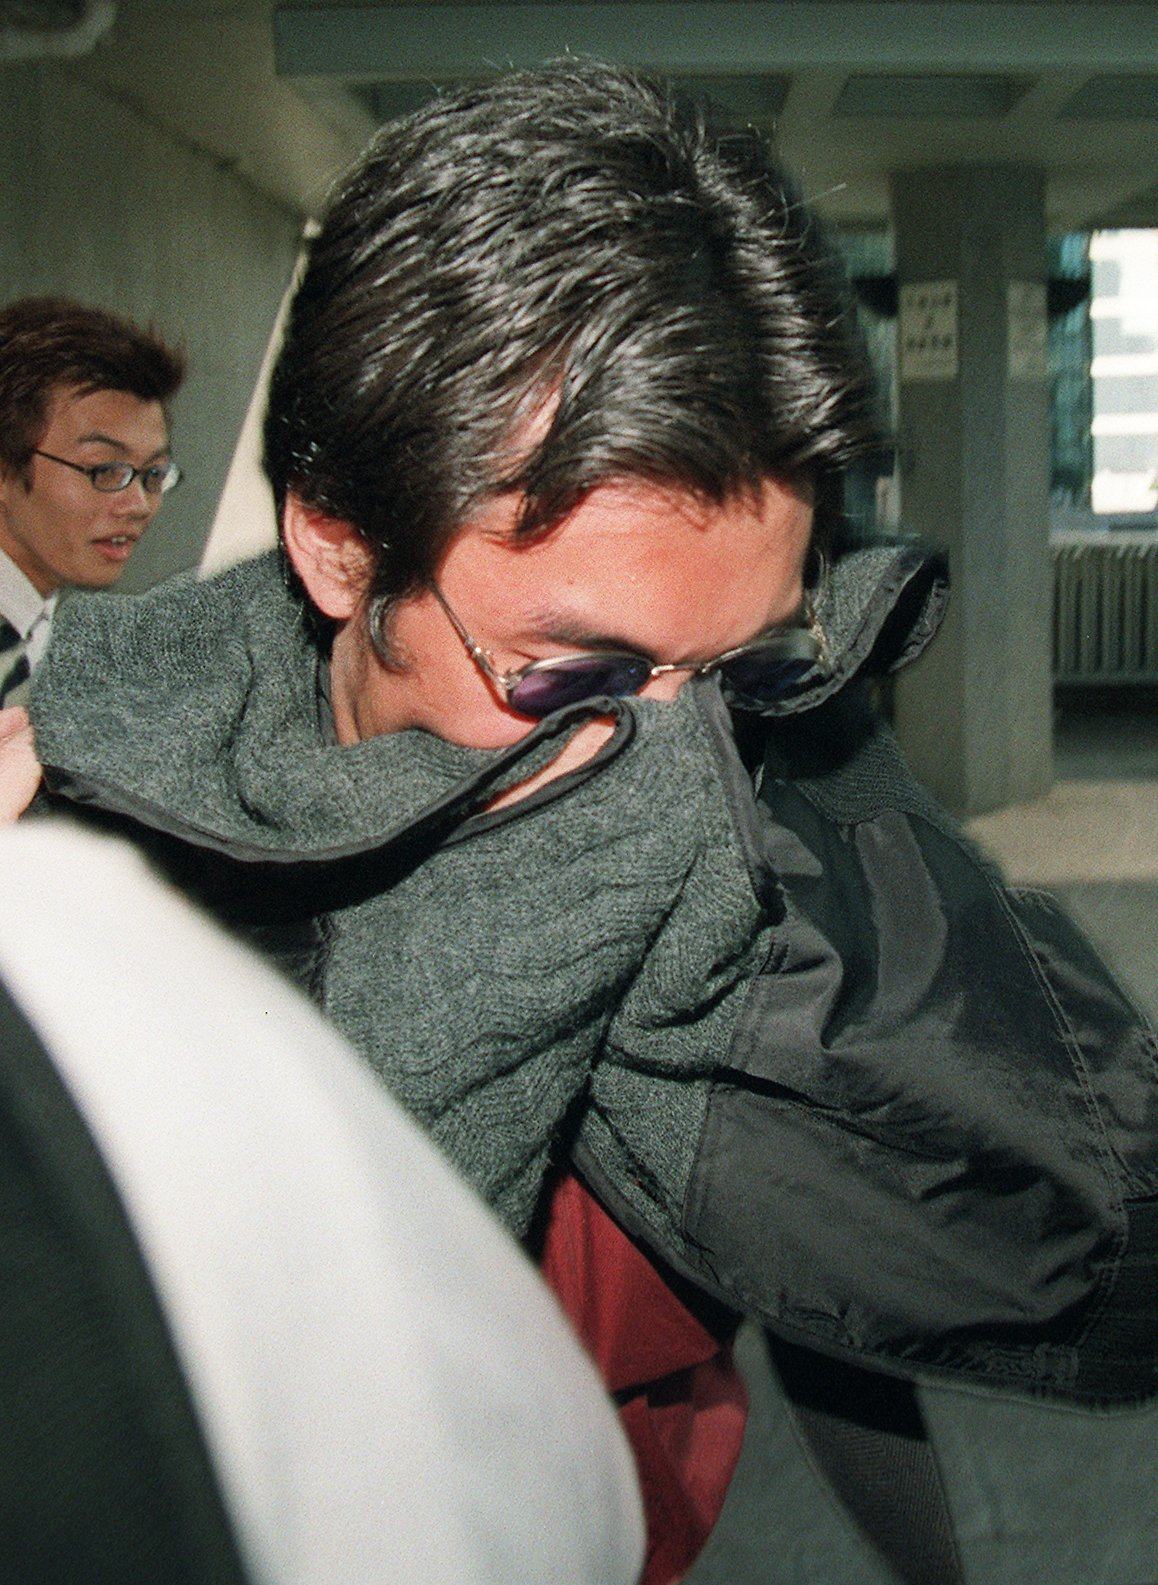 Elvis Leung Yiu-chi’s live-in lover, Wu Man-lung, leaves the Hong Kong High Court after testifying in the trial of Kwong Kwok-leung for Leung’s murder. Kwong was jailed for life for the crime and later committed suicide in his prison cell. Photo: SCMP